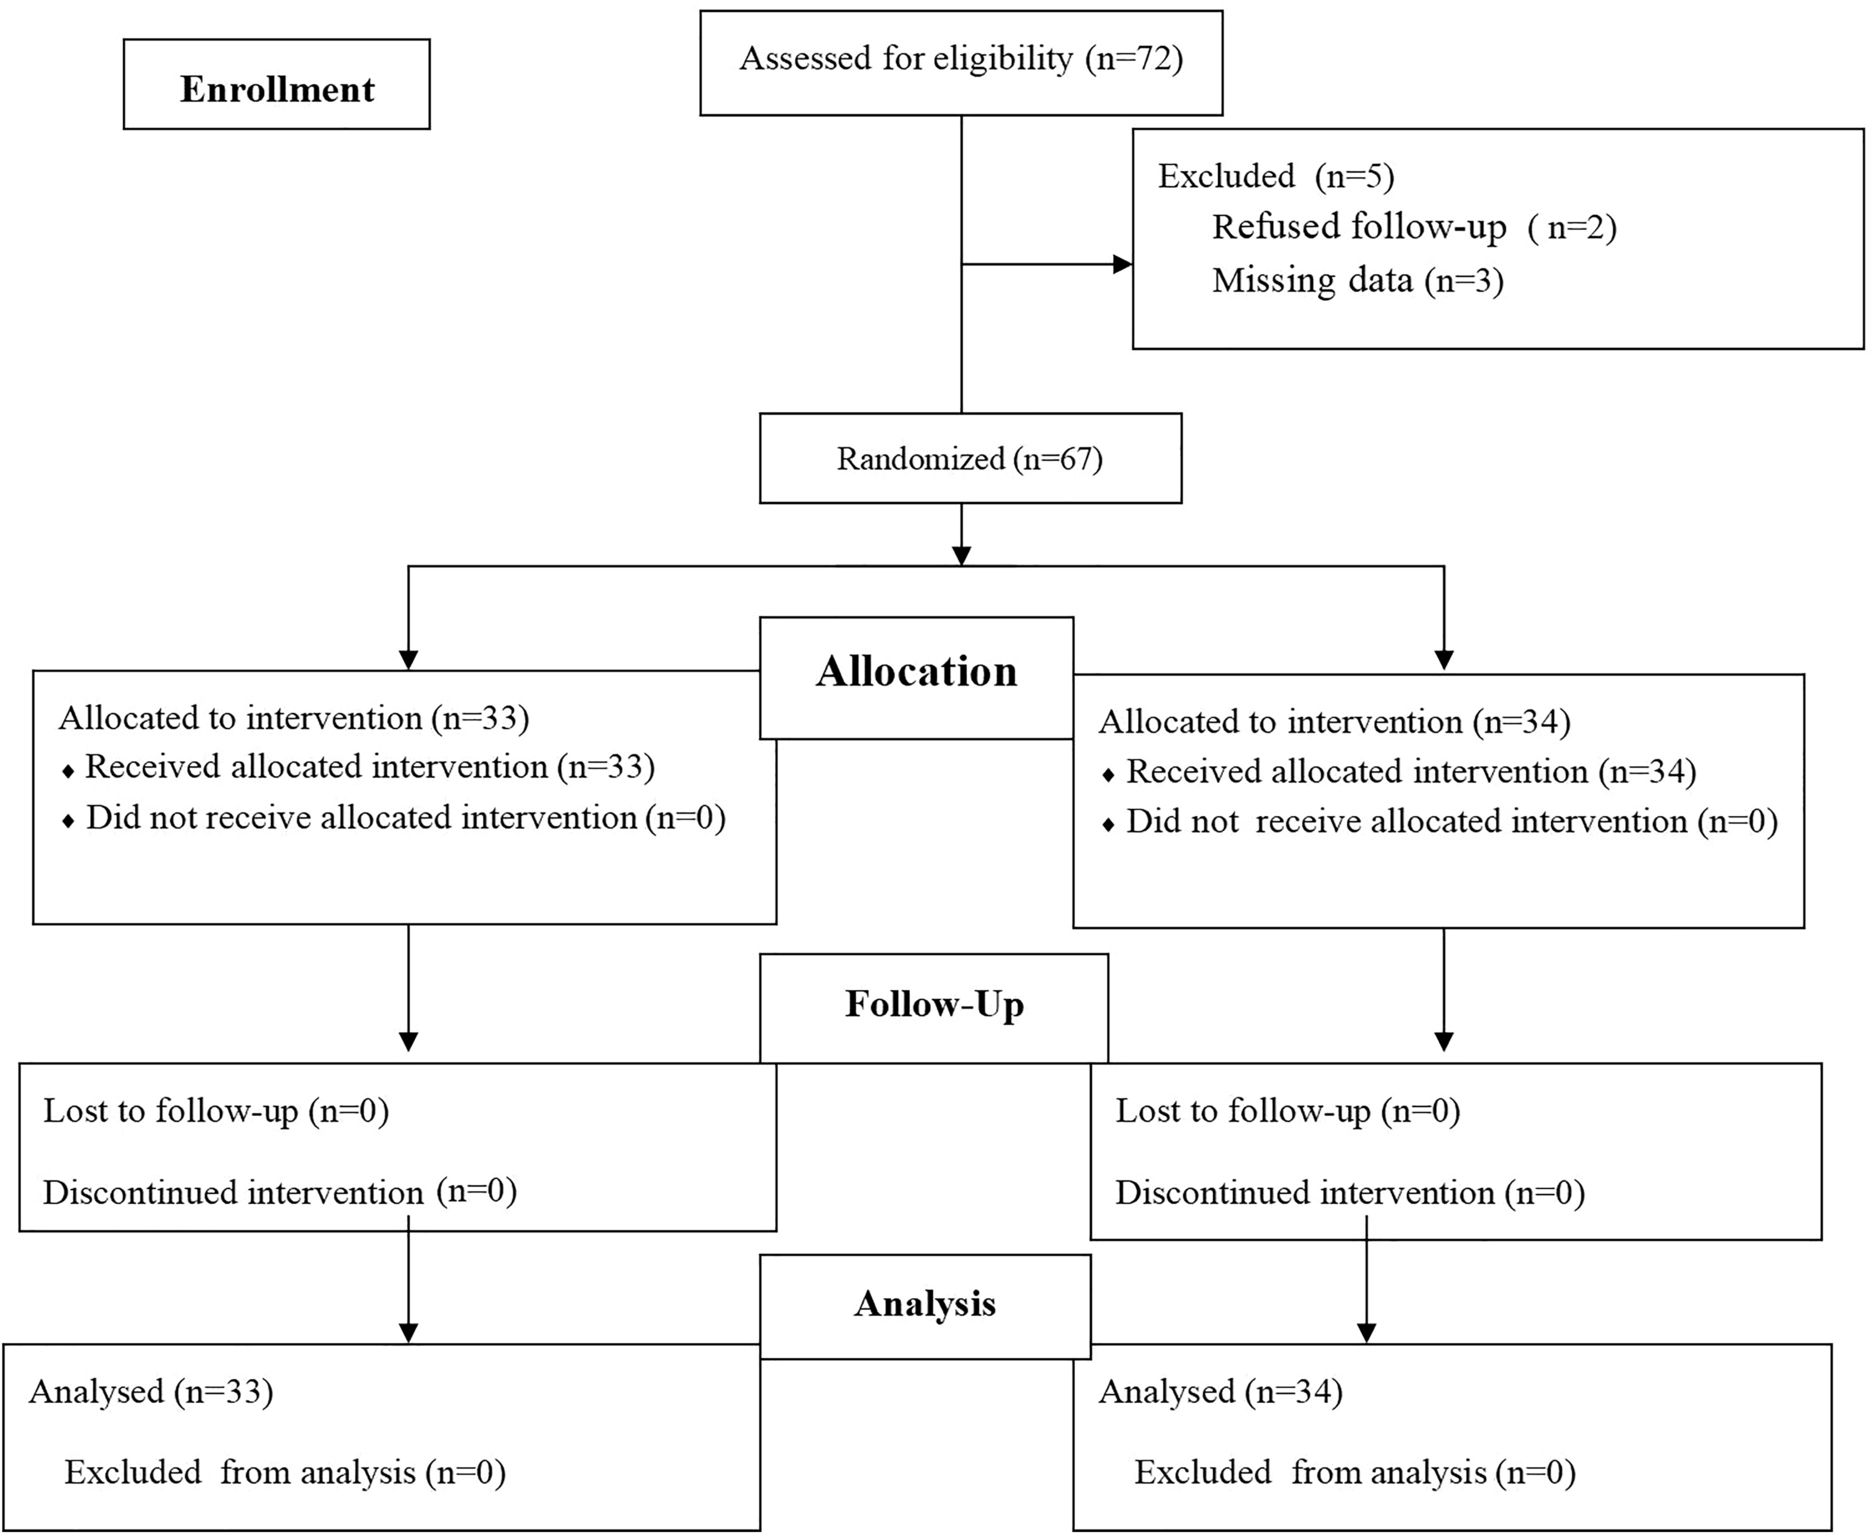 Analgesic Effectiveness of Truncal Plane Blocks in Patients Undergoing the Nuss Procedure: A Randomized Controlled Trial